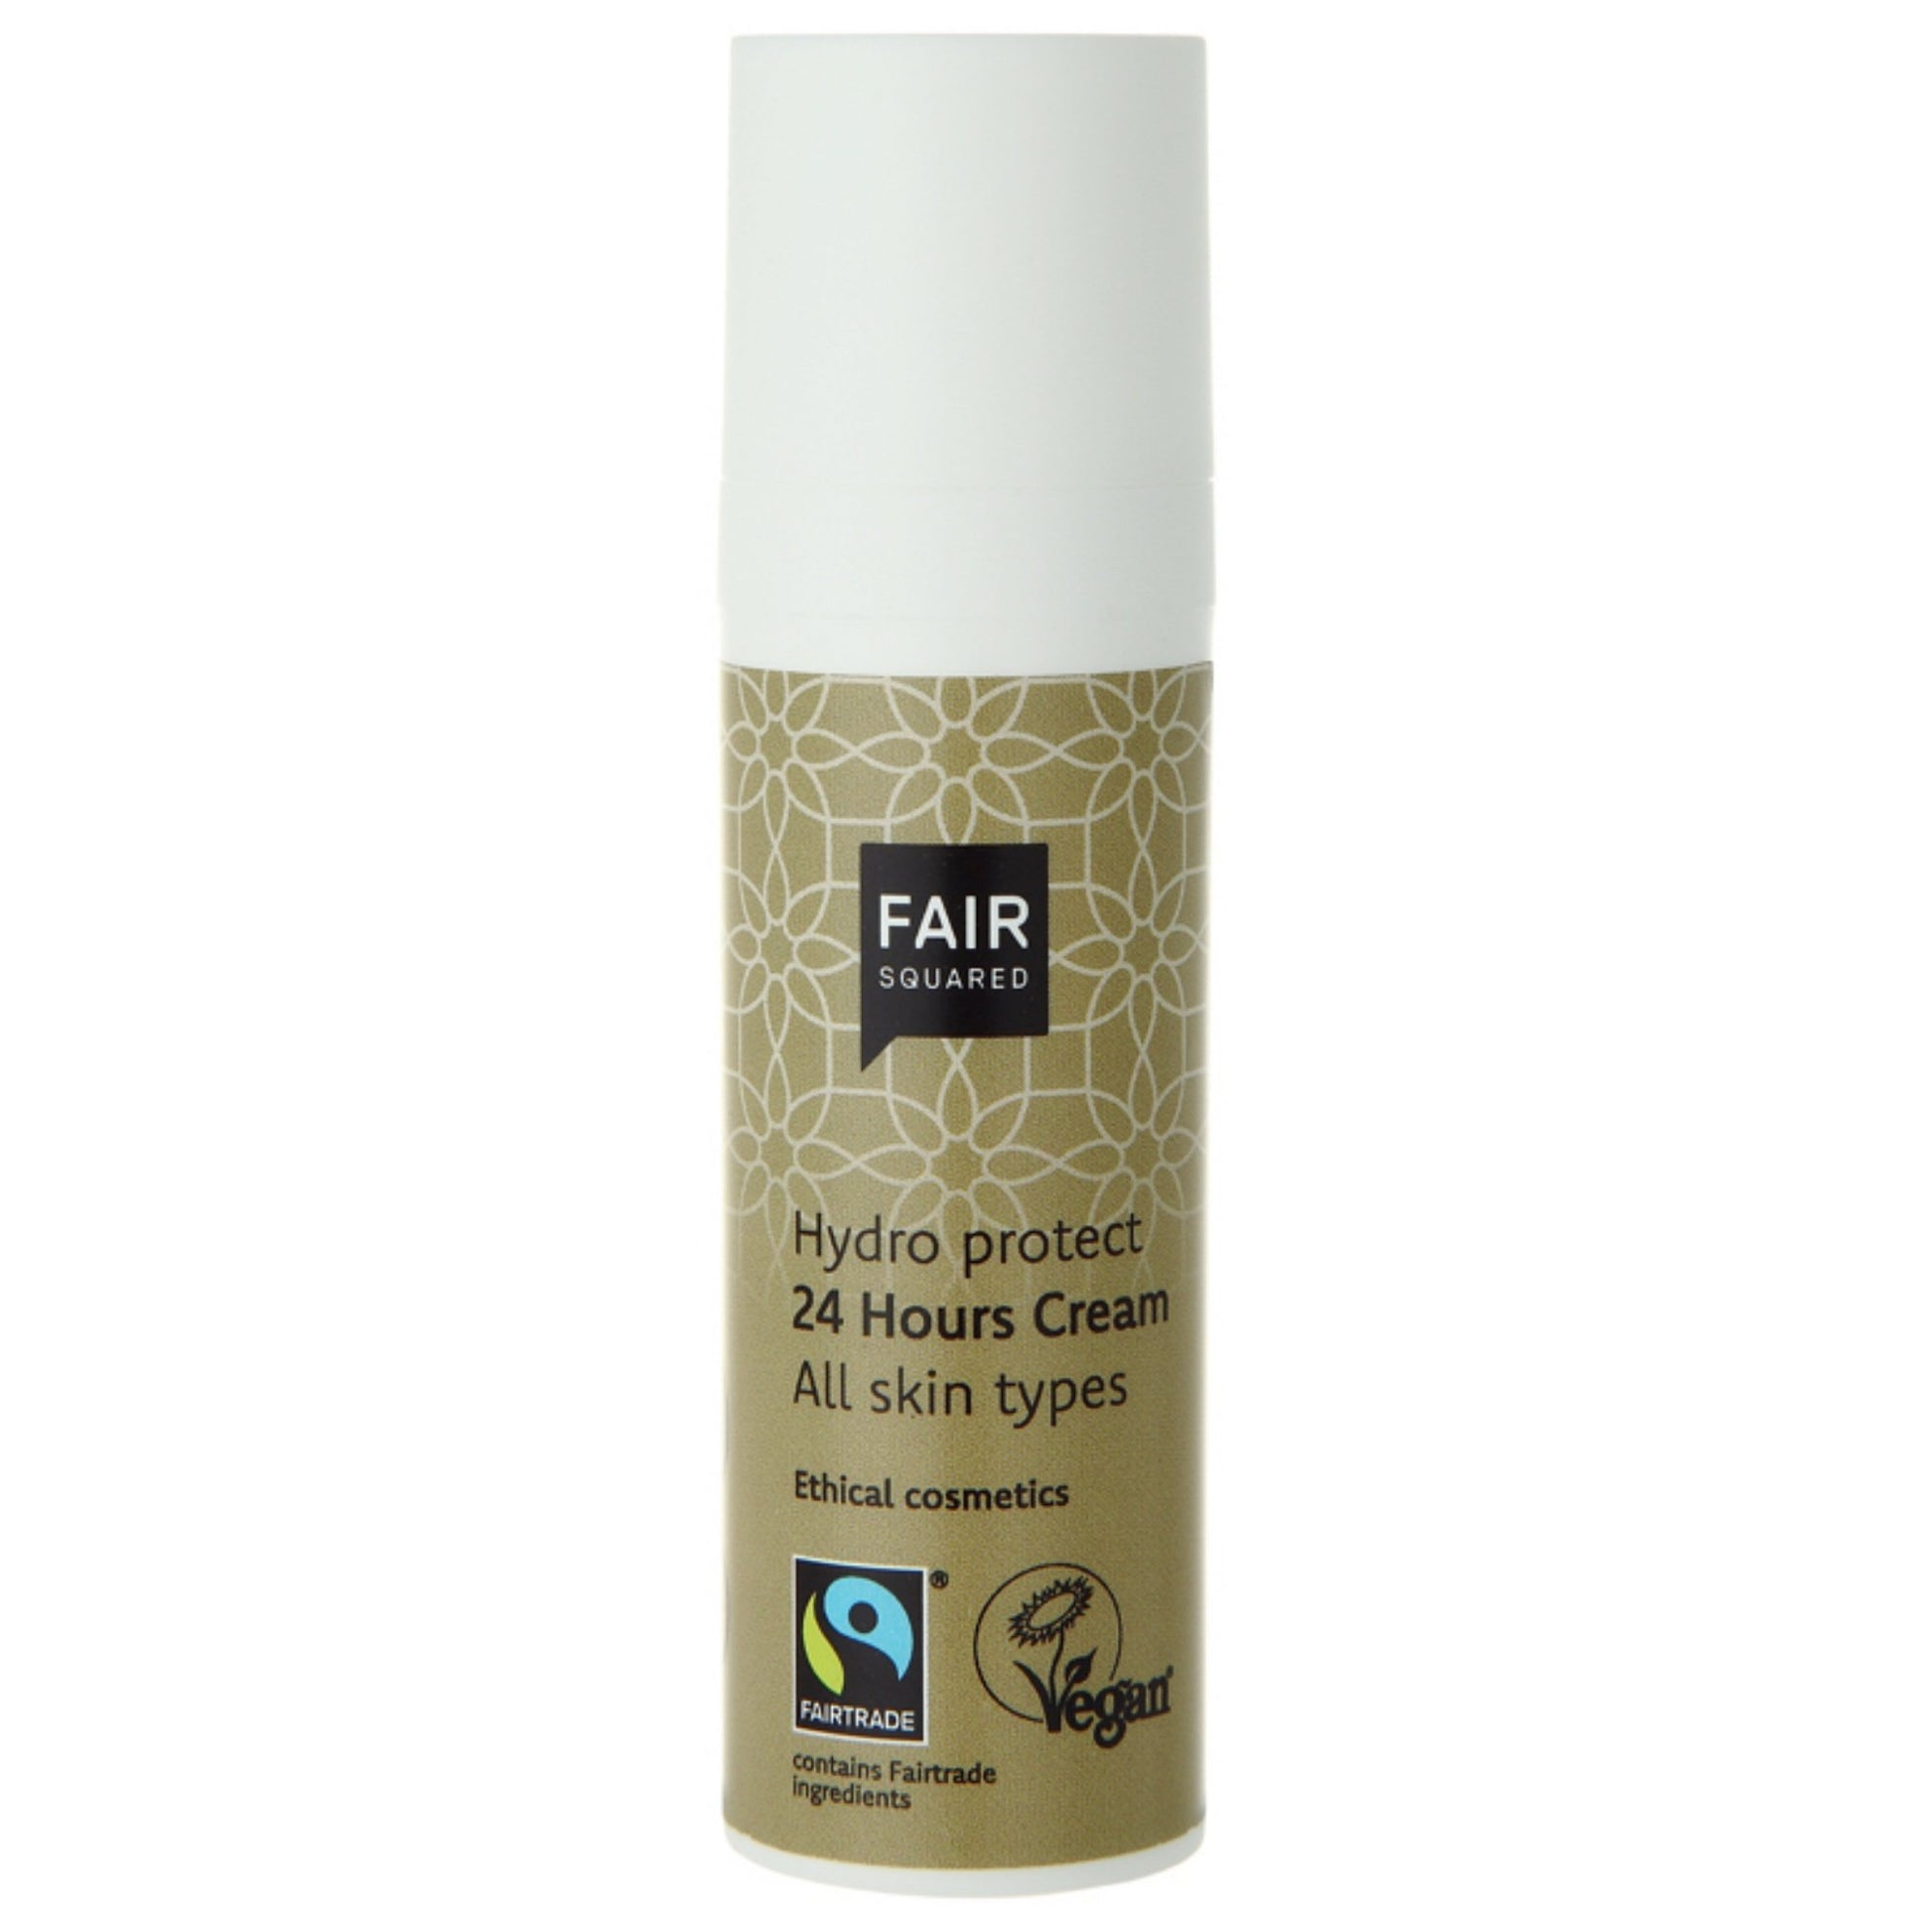 FAIR SQUARED Hydro Protect 24 Hours Cream | Fairtrade Vegan Natural Halal | Dispenser | BeoVERDE.ie